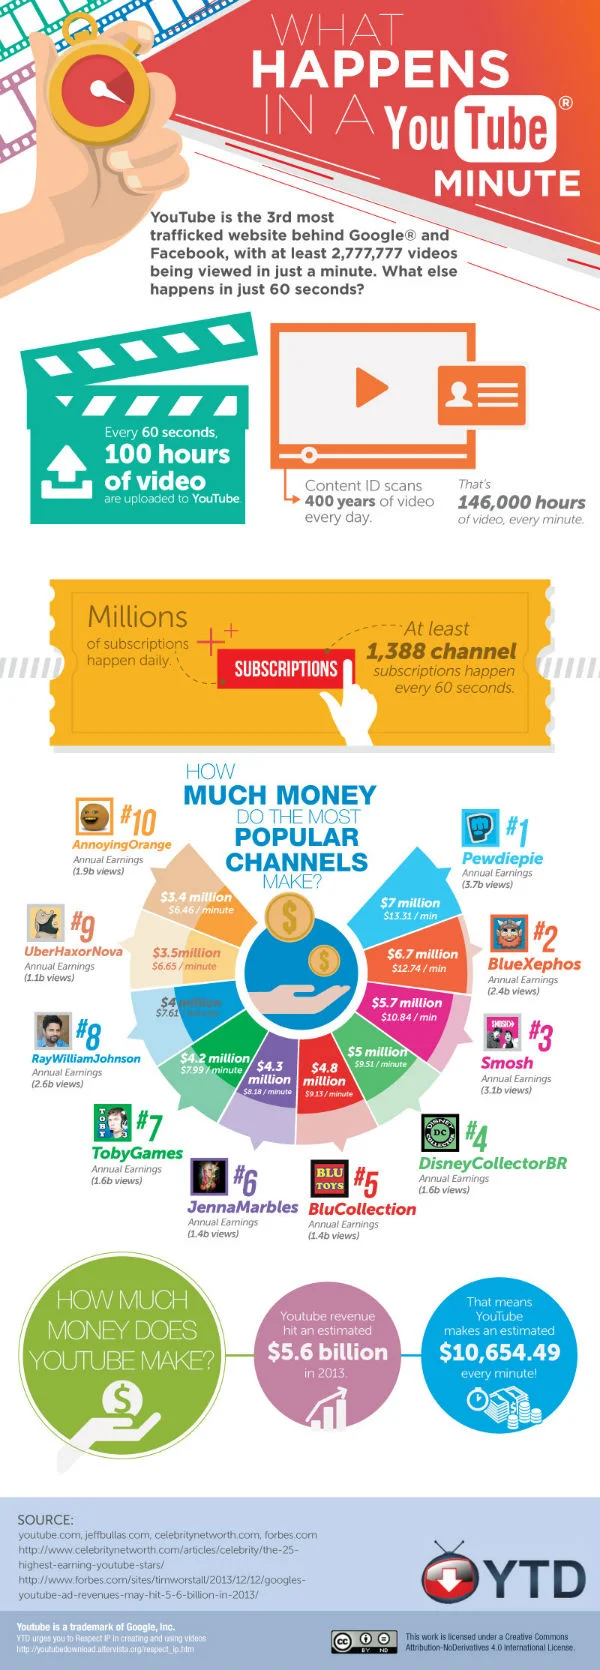 What Happens in Just ONE Minute on #YouTube - #infographic #socialmedia